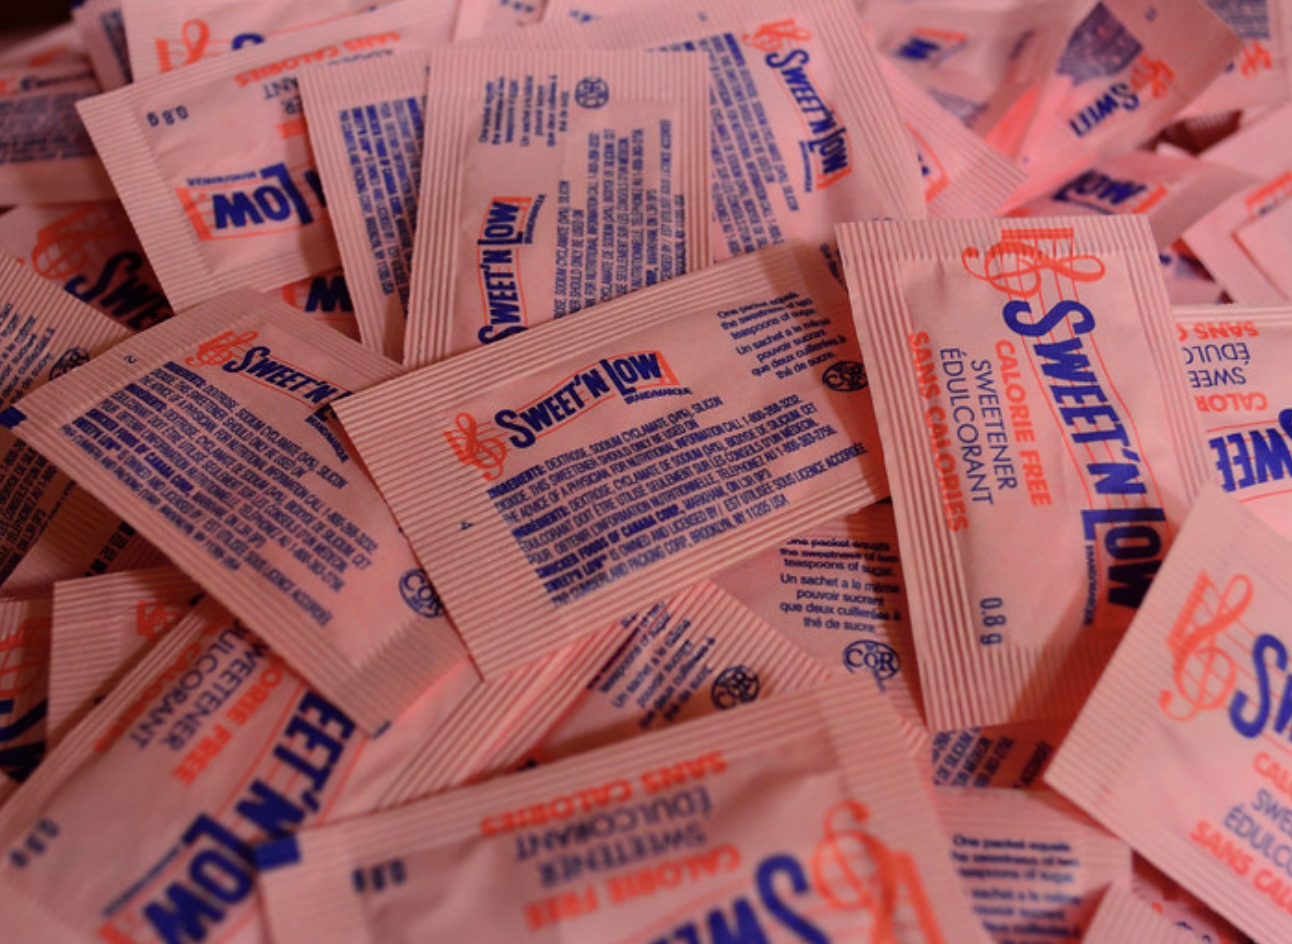 Packets of artificial sweetener